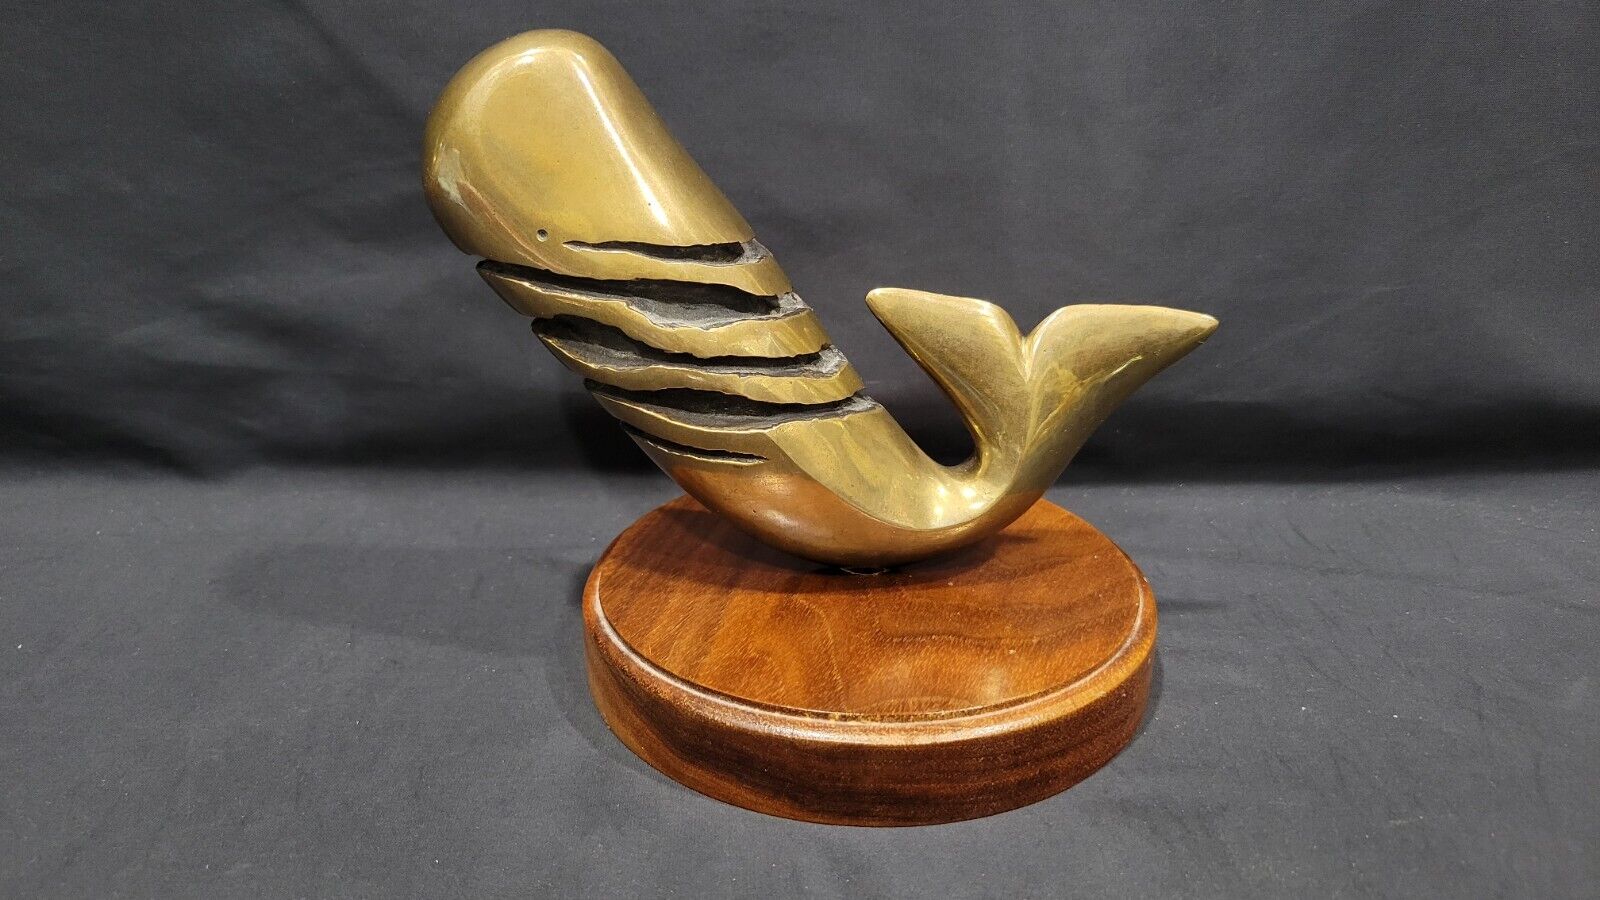 Vintage 1985 BRONZE SCULPTURE OF A WHALE, Signed JBH, Numbered 26/50